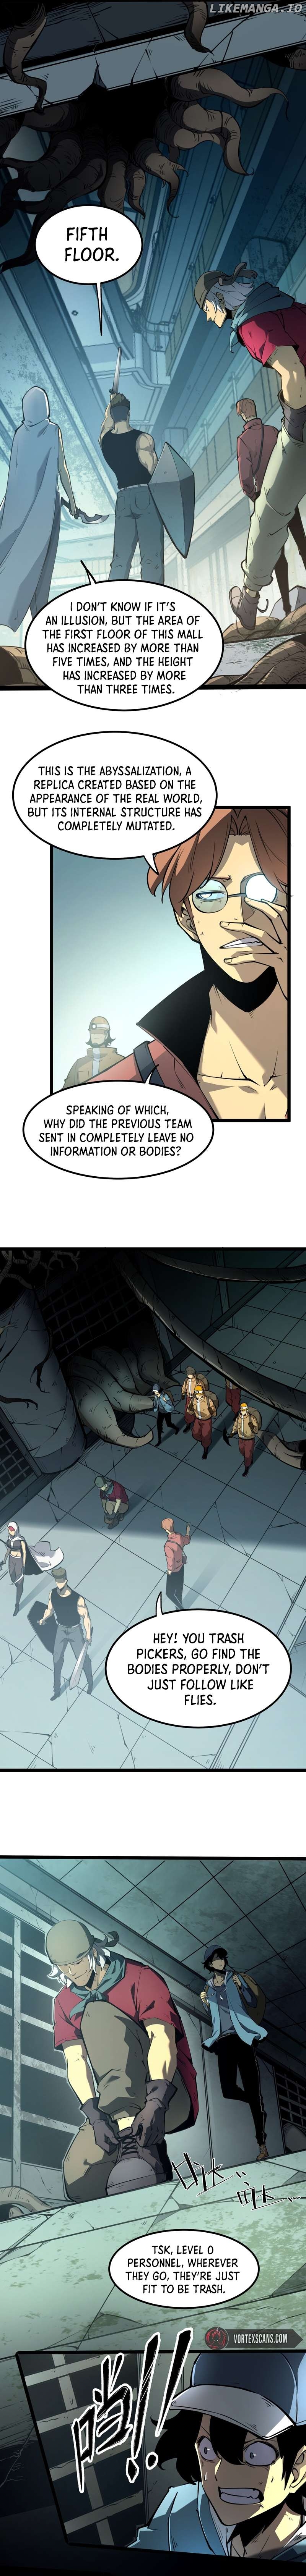 I Became The King by Scavenging Chapter 1 - page 16